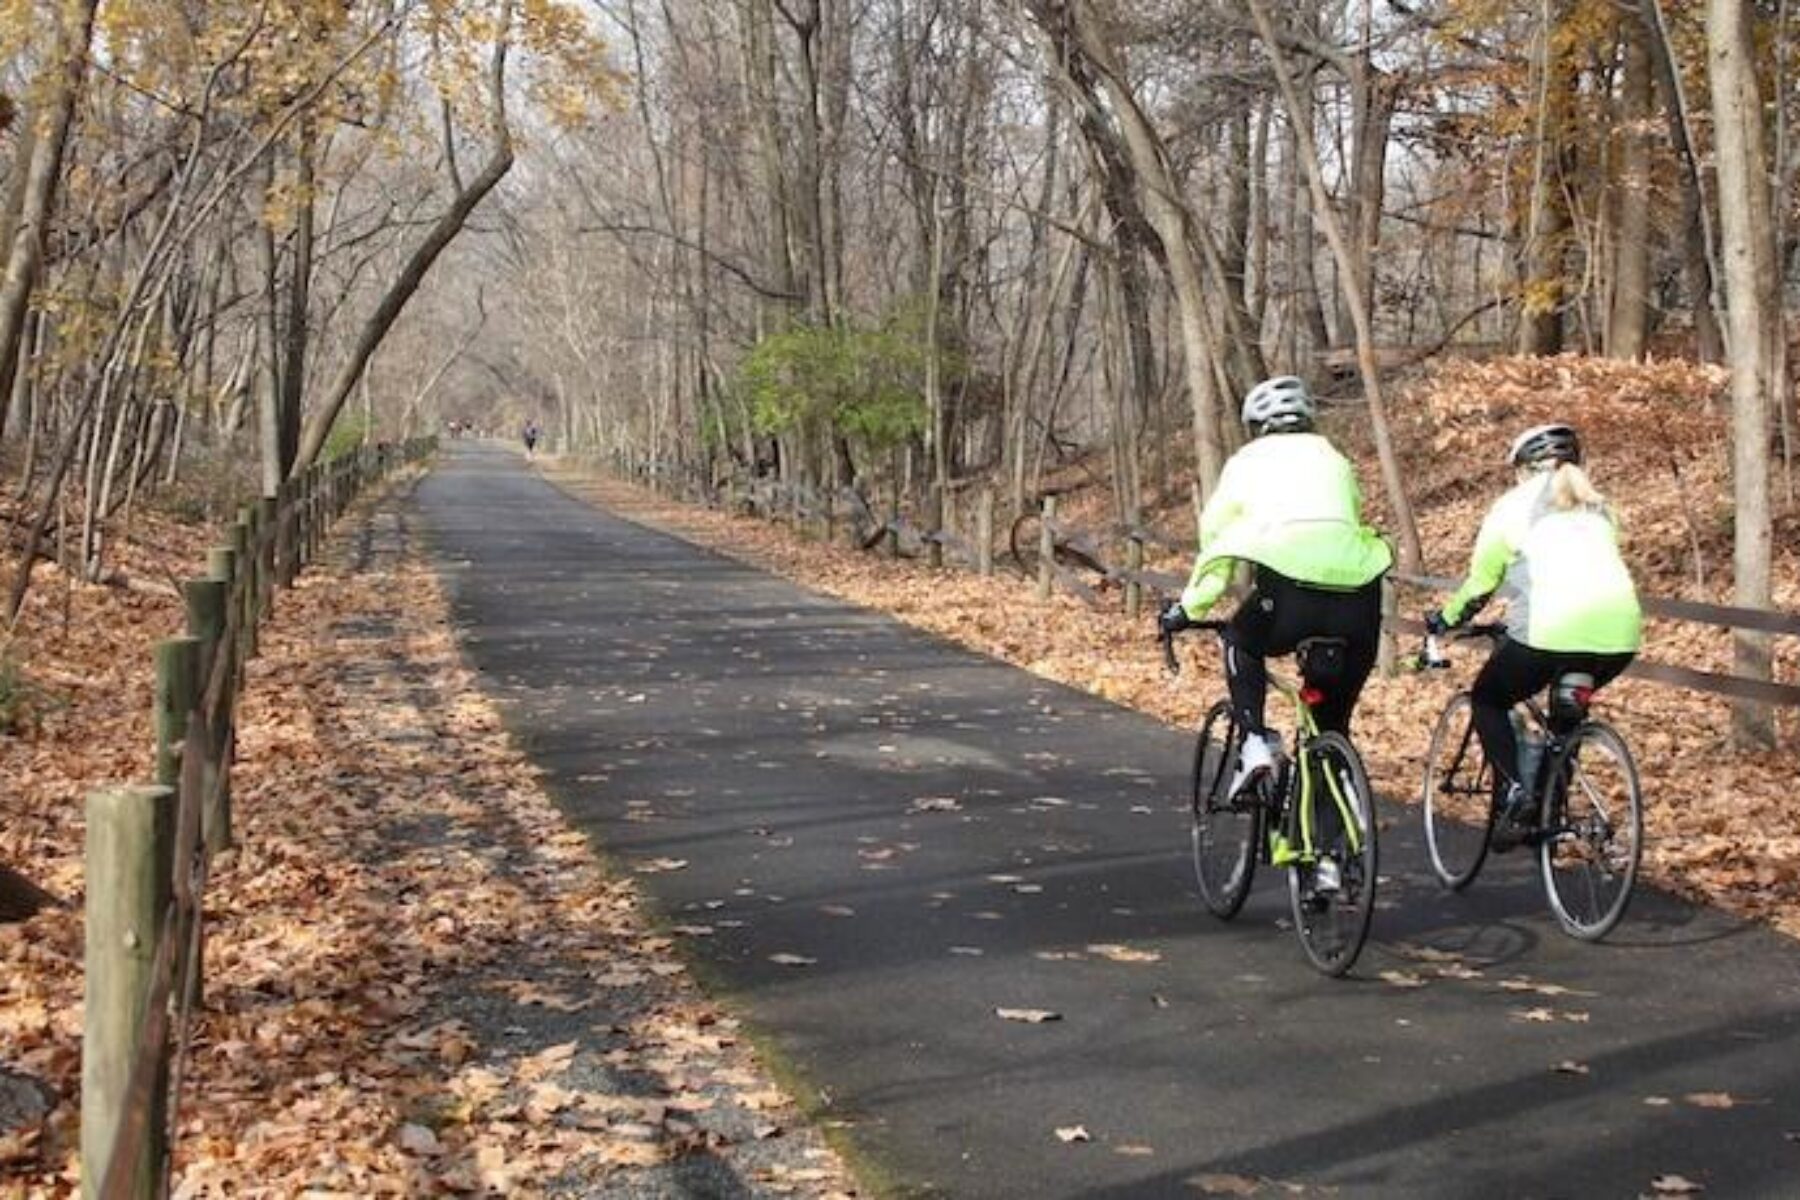 Schuylkill River Trail through Valley Forge National Historical Park | Photo courtesy Montgomery County Planning Commission | CC BY SA 2.0